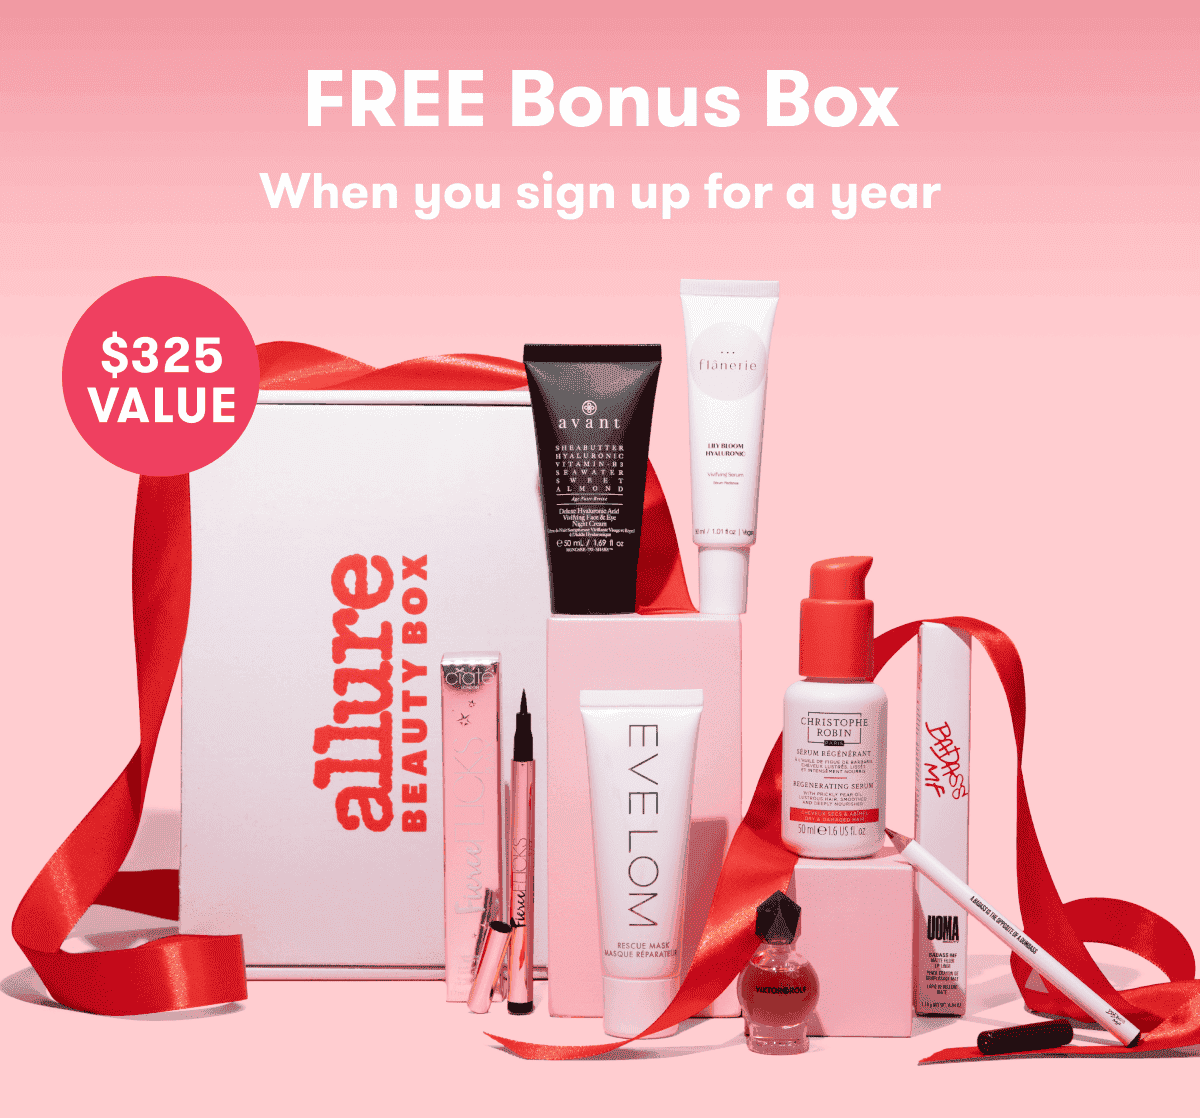 Free Bonus box when you sign up for a year. \\$325 Value.